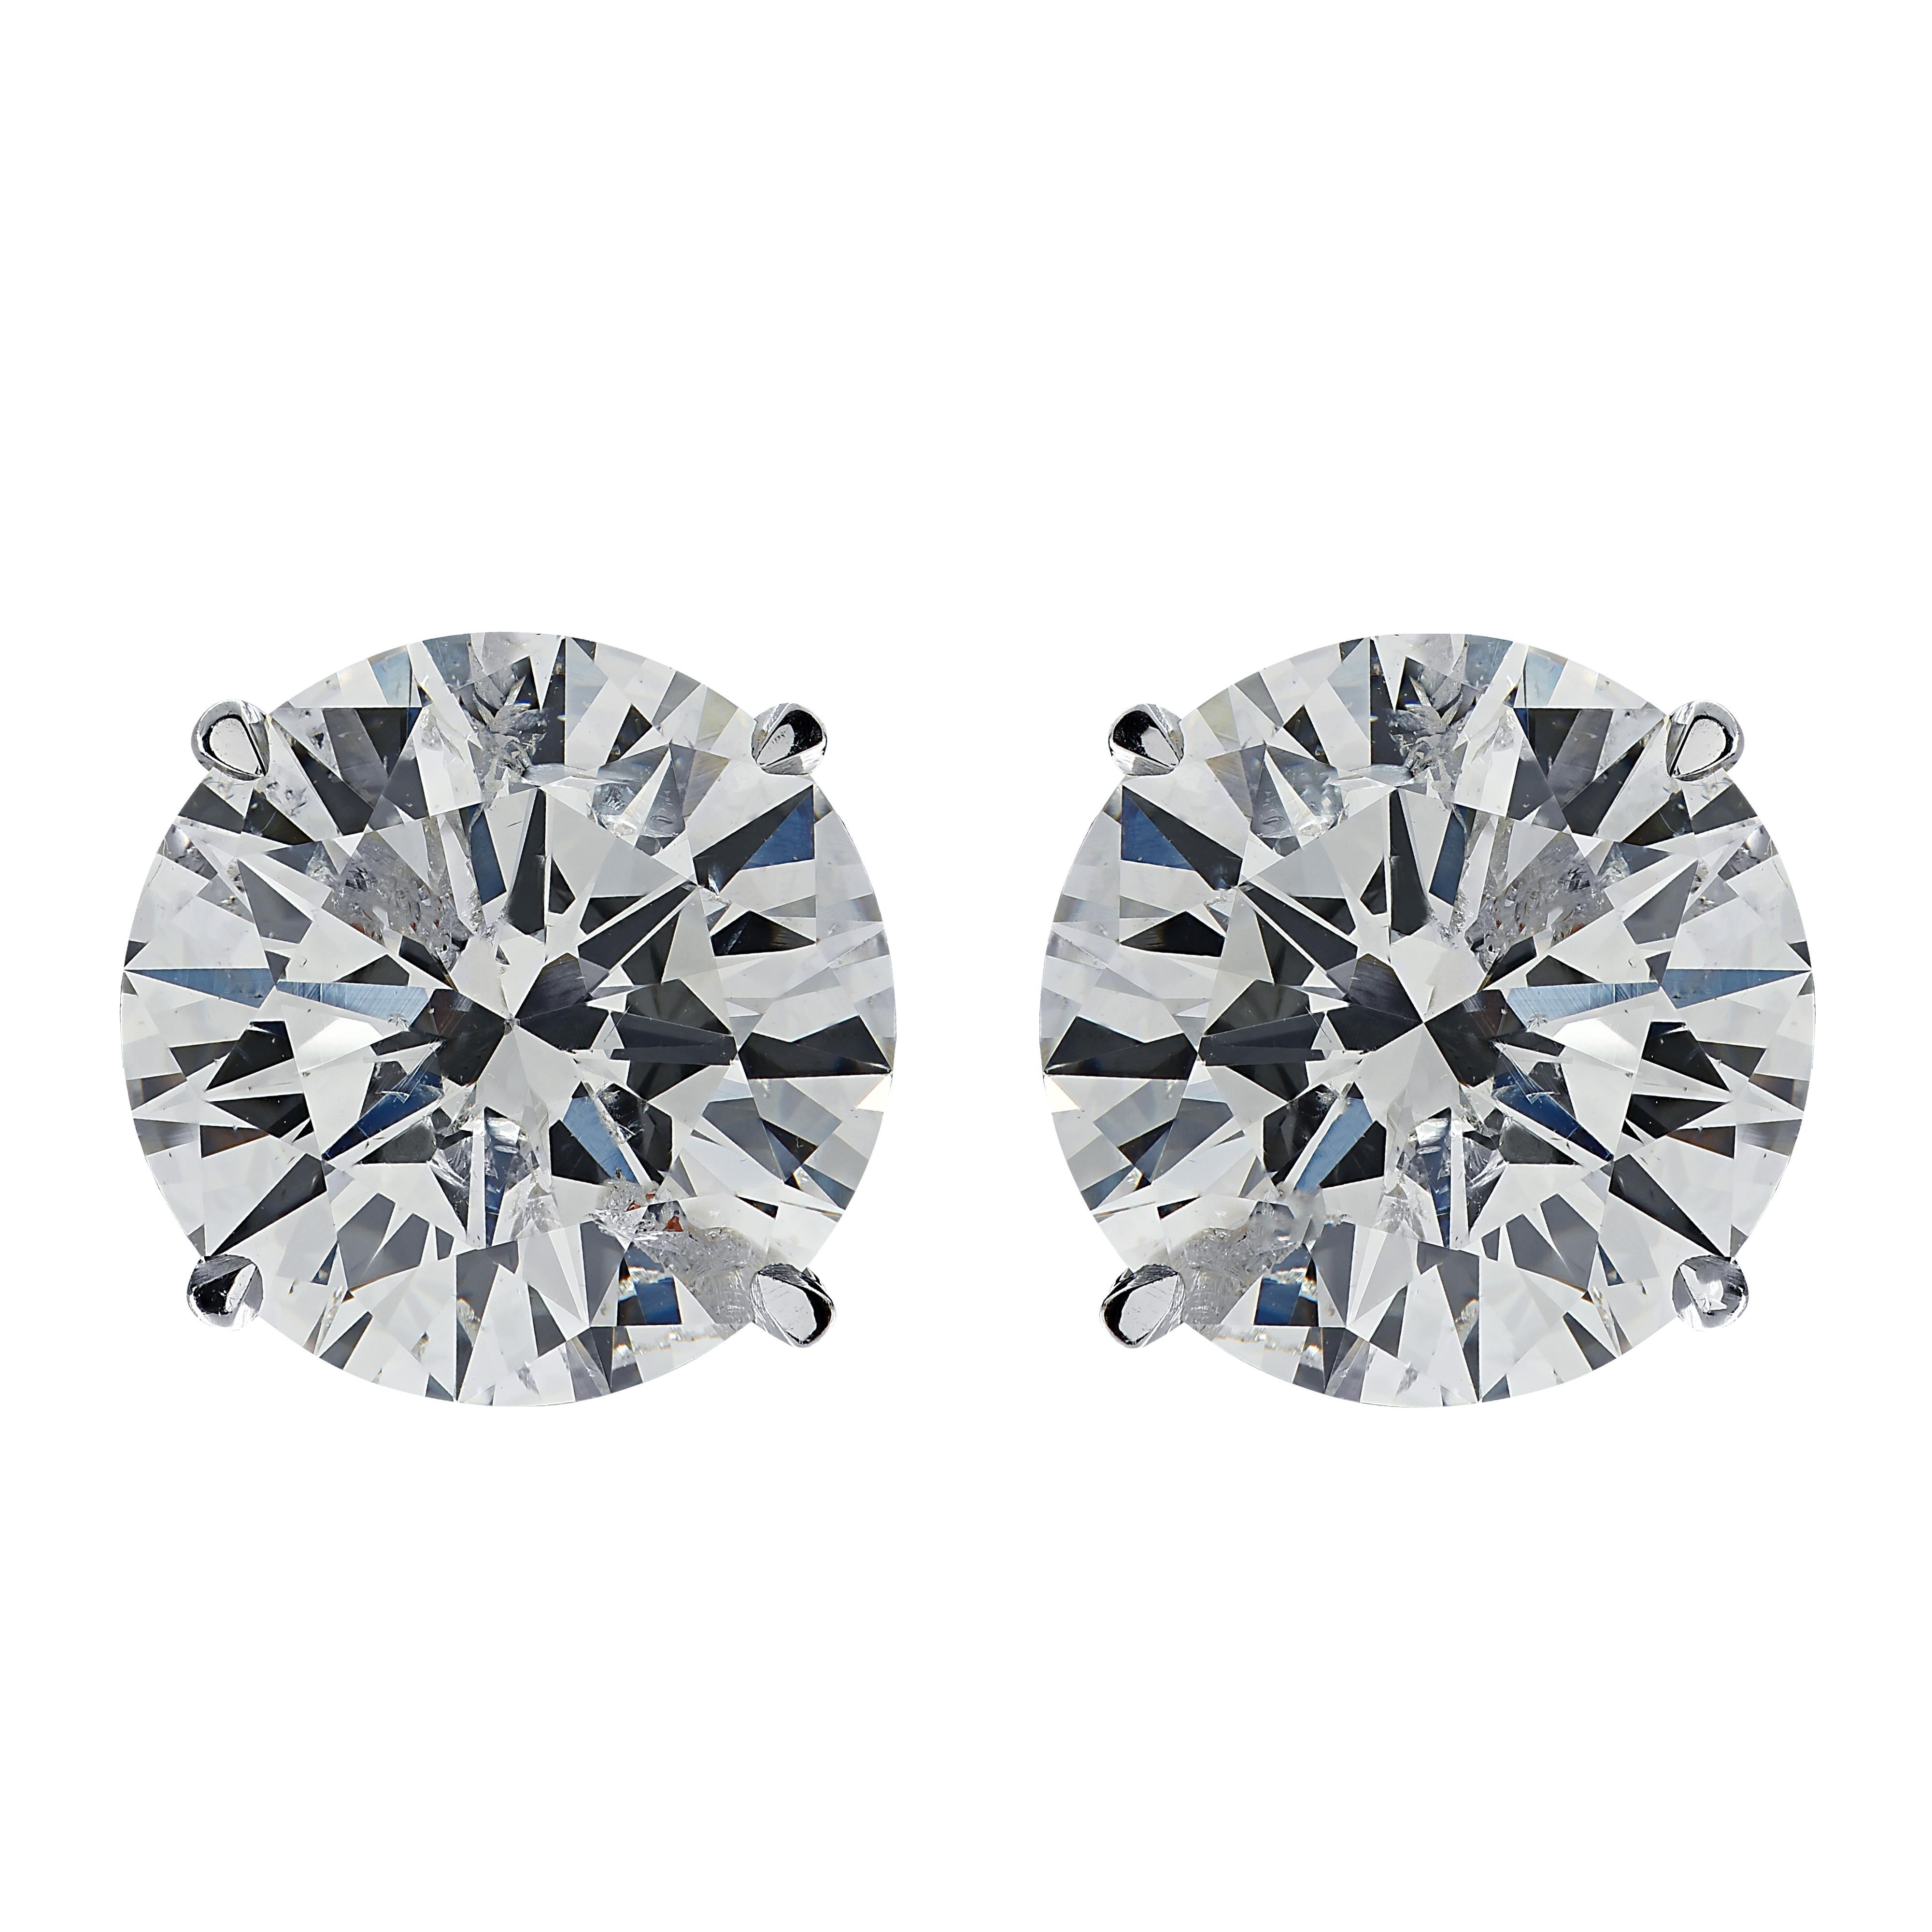 Stunning Vivid Diamonds solitaire stud earrings crafted in white gold, showcasing 2 spectacular GIA certified round brilliant cut diamonds weighing 4.11 carats total, J color VS2-SI1 clarity. These diamonds were carefully selected and perfectly